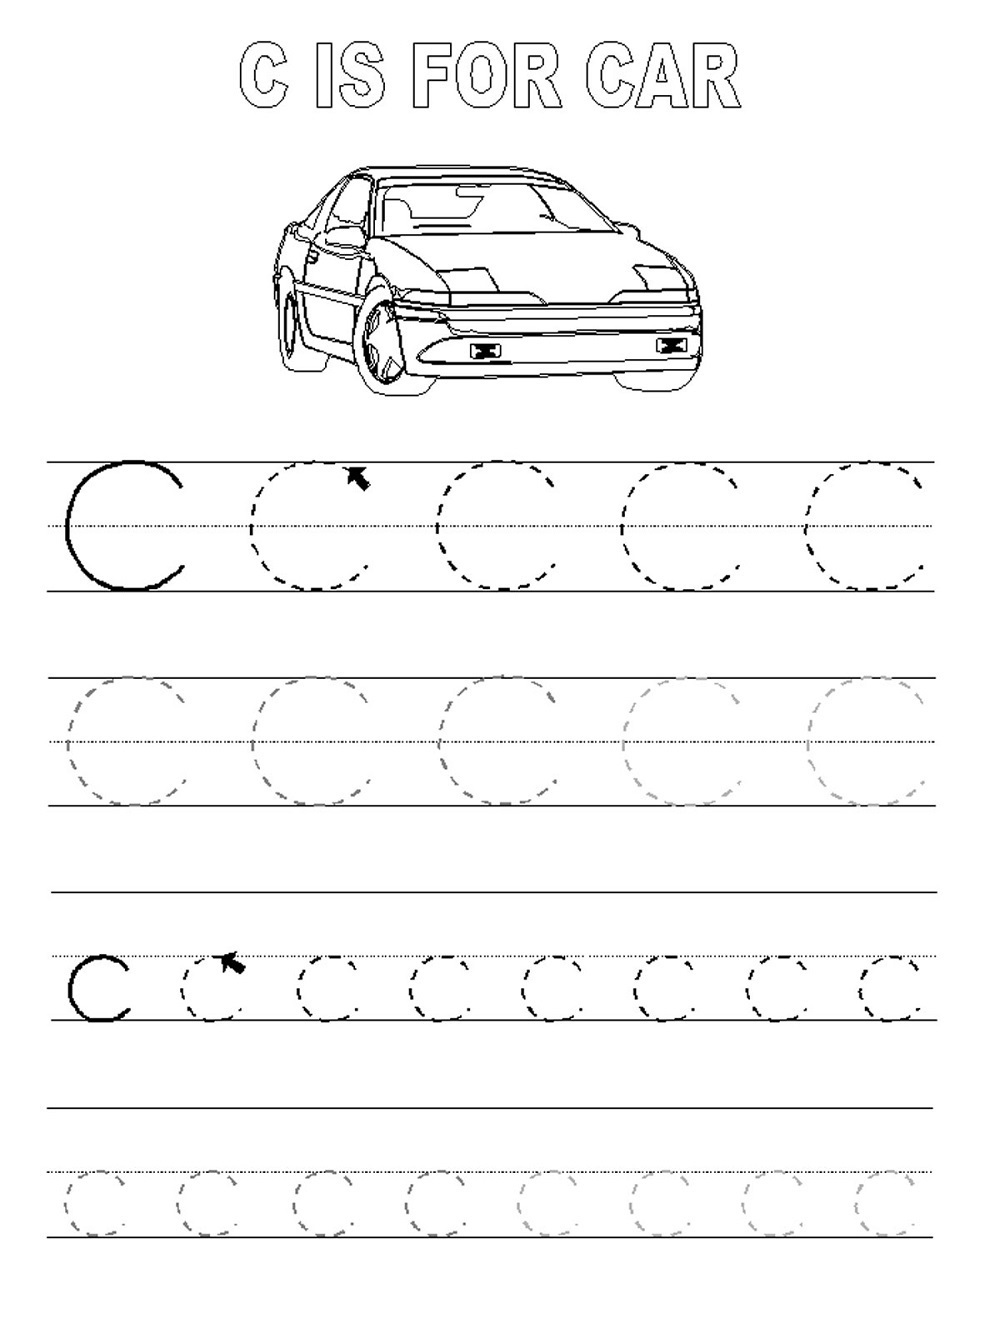 abc-trace-worksheets-2019-activity-shelter